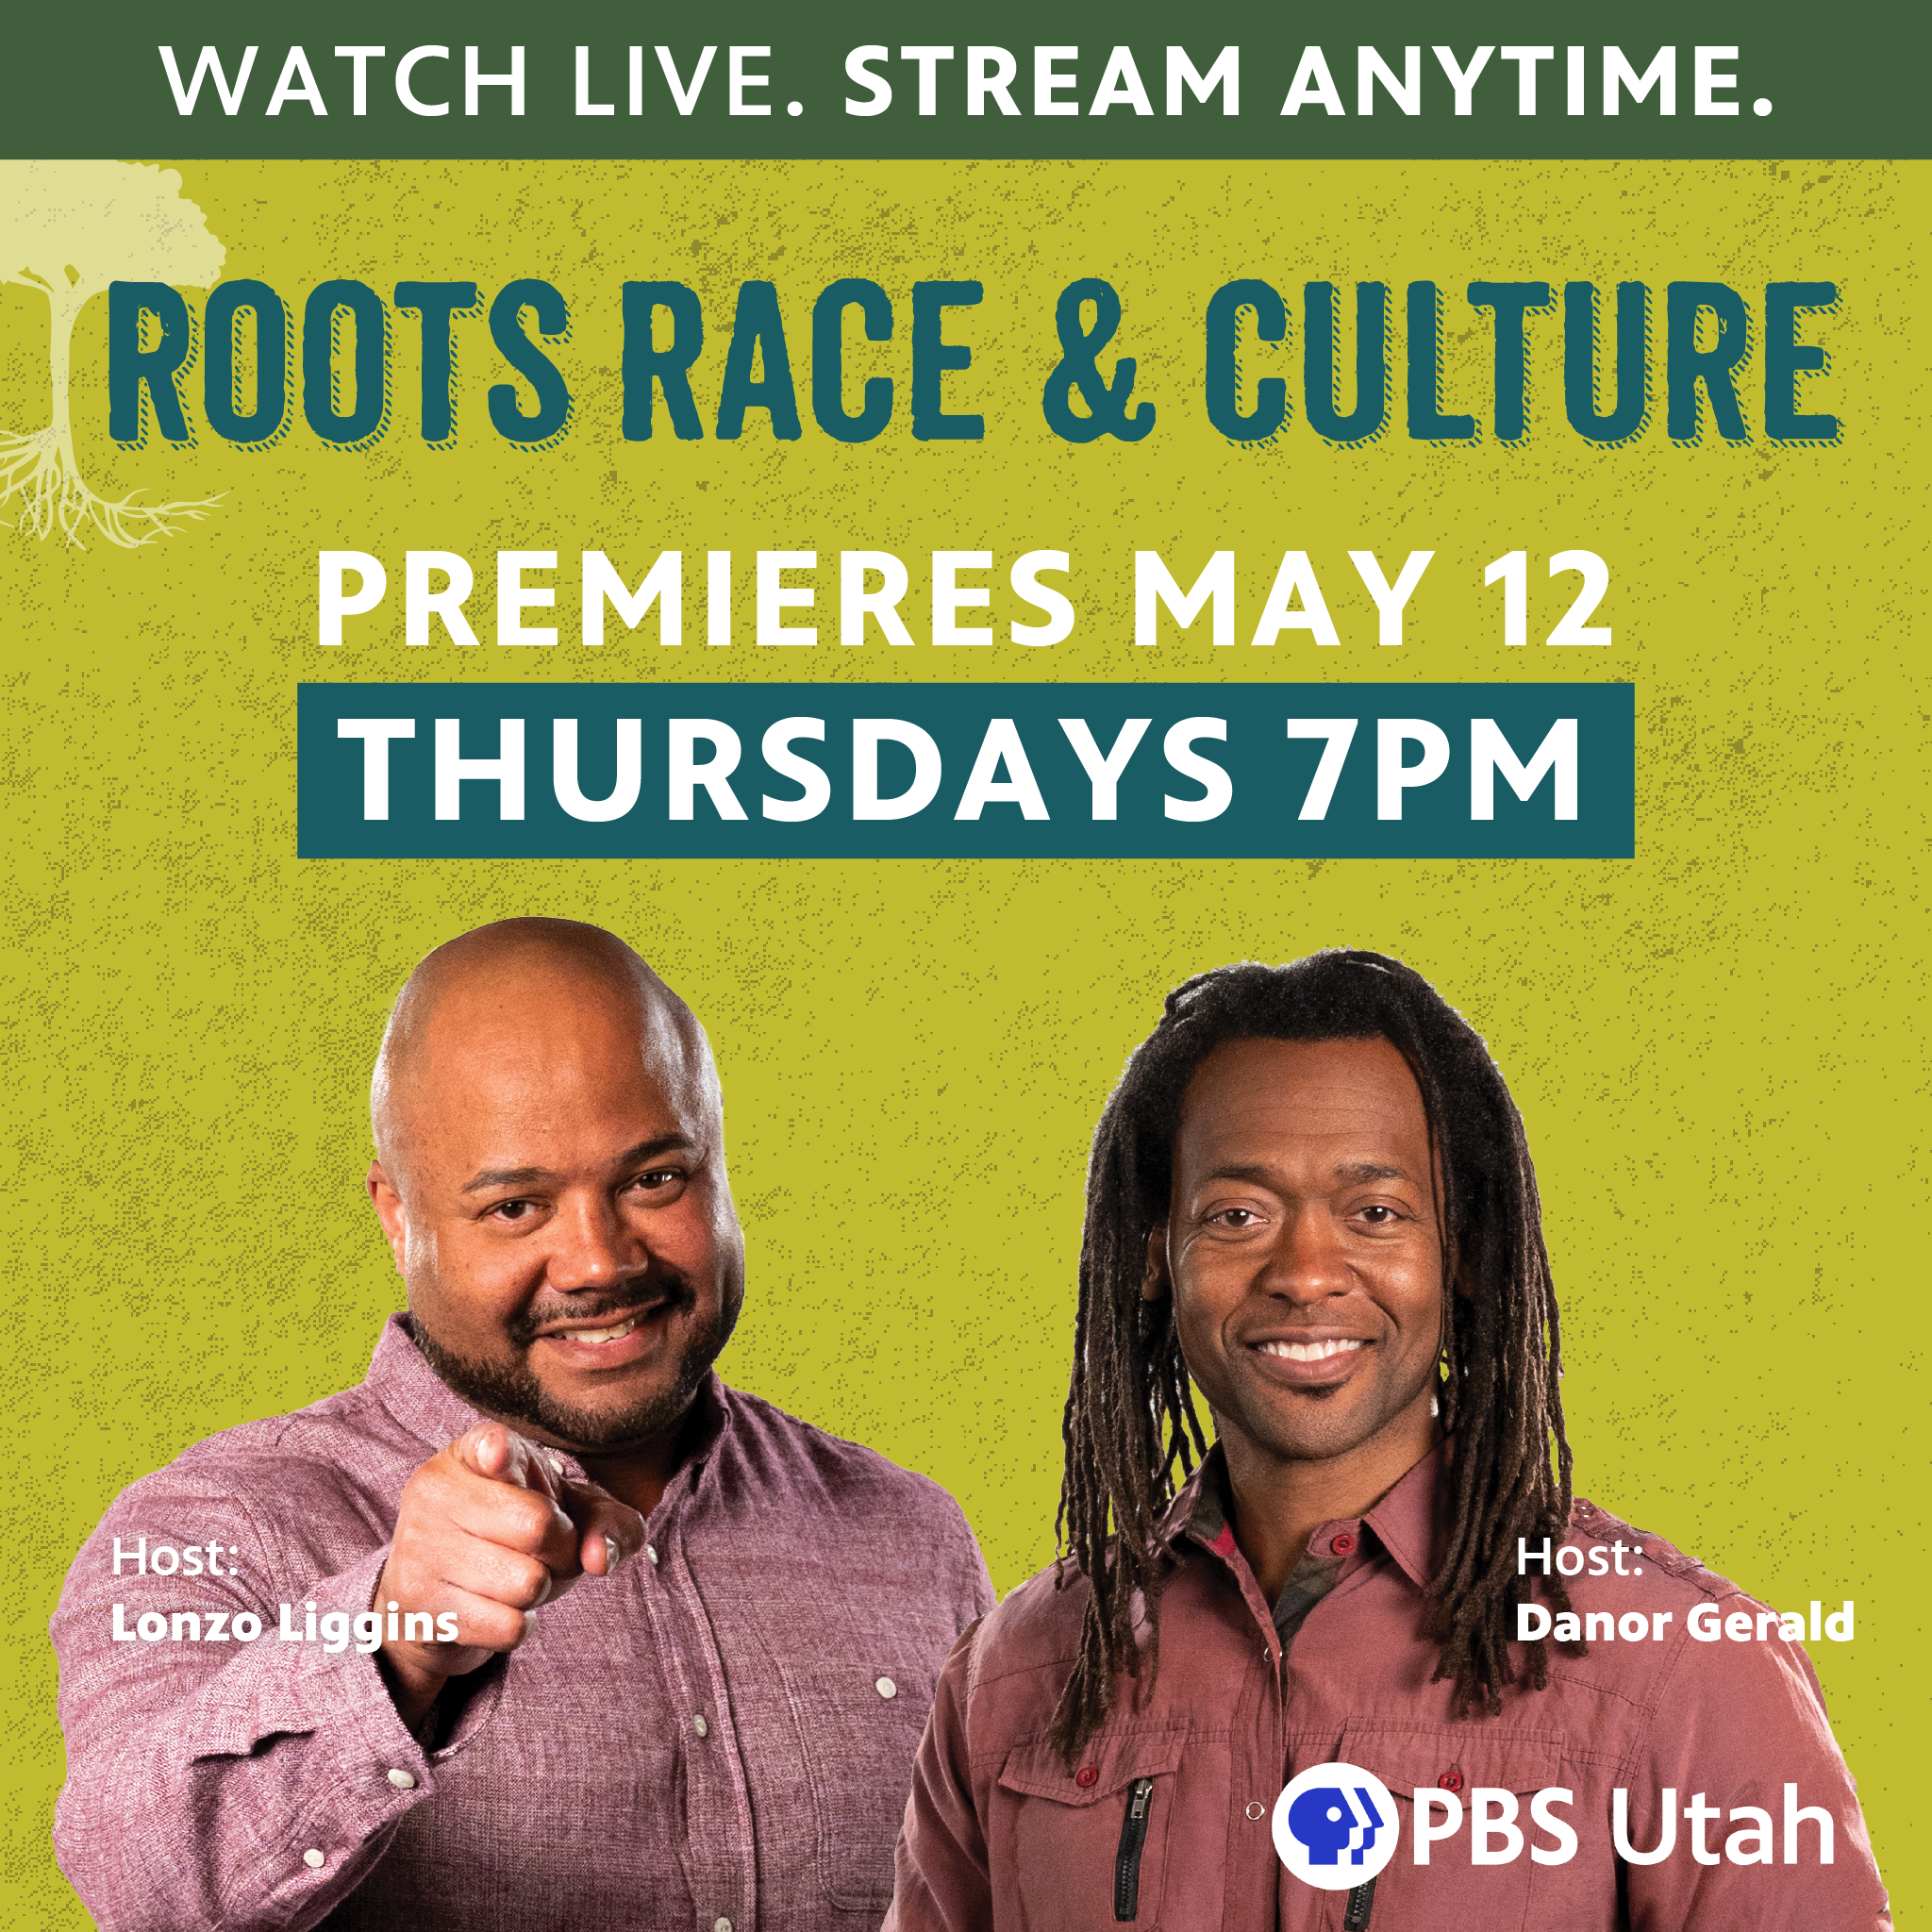 New Talk Show from PBS Utah! Roots, Race & Culture